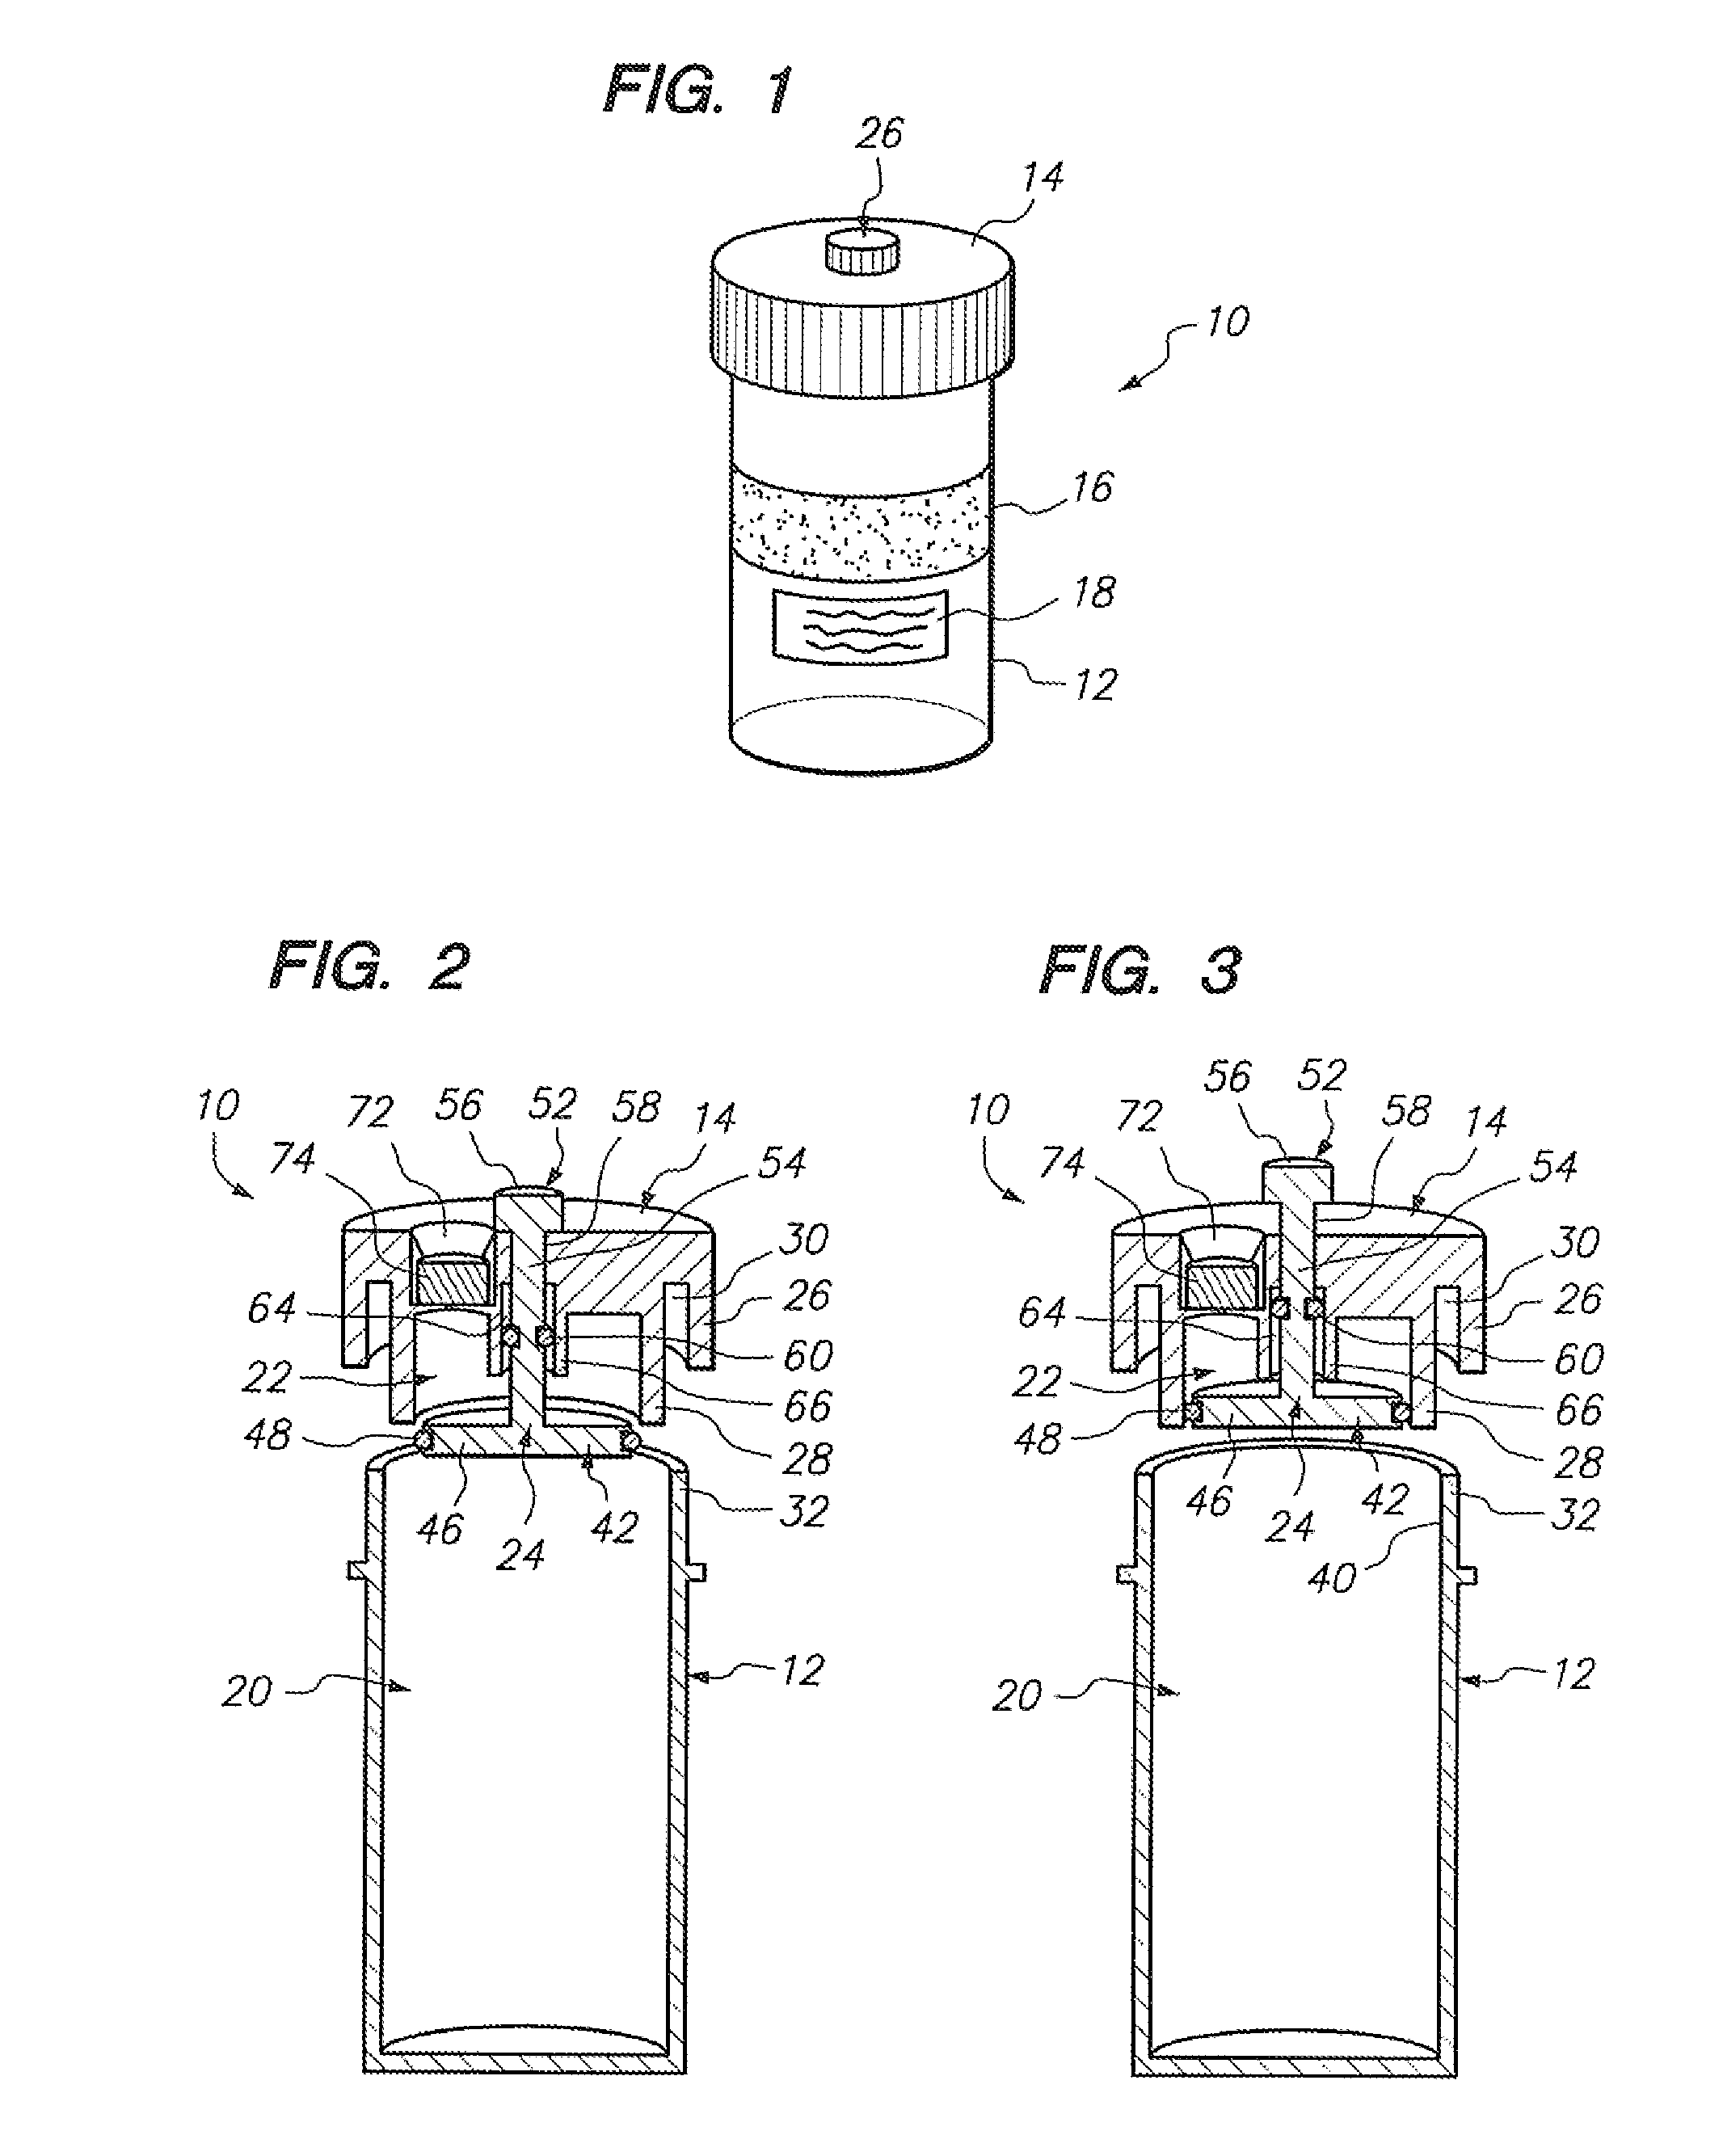 Method and Apparatus for Obtaining Aliquot from Liquid-Based Cytological Sample